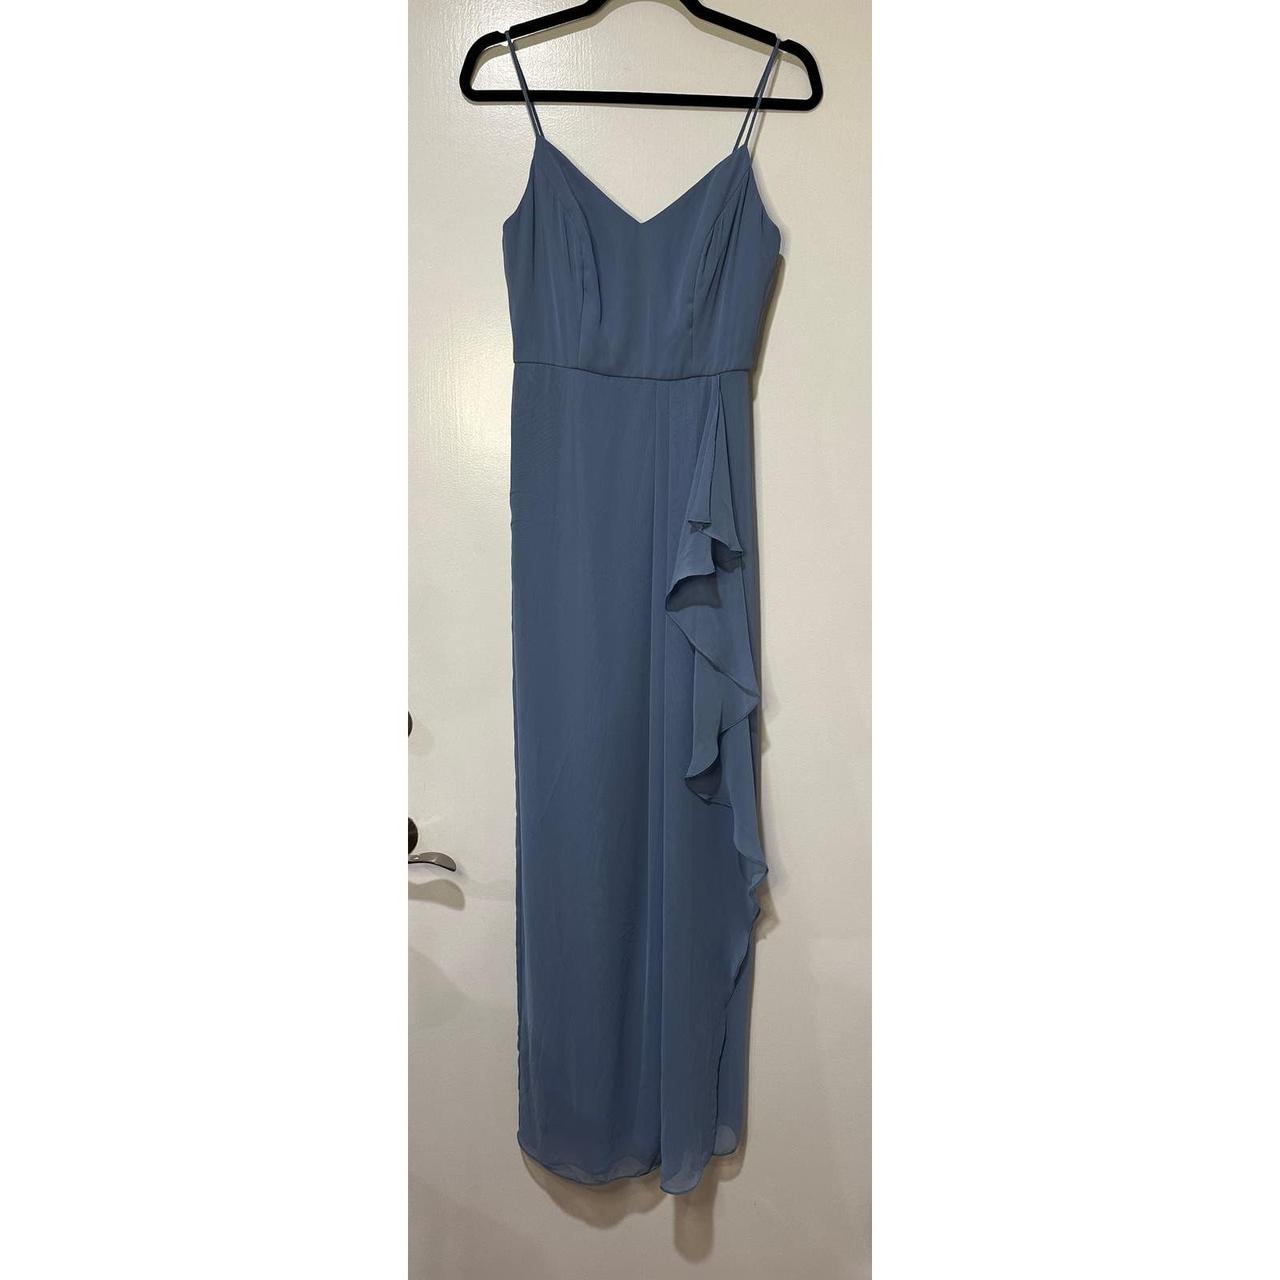 item listed by thrift_up_oc